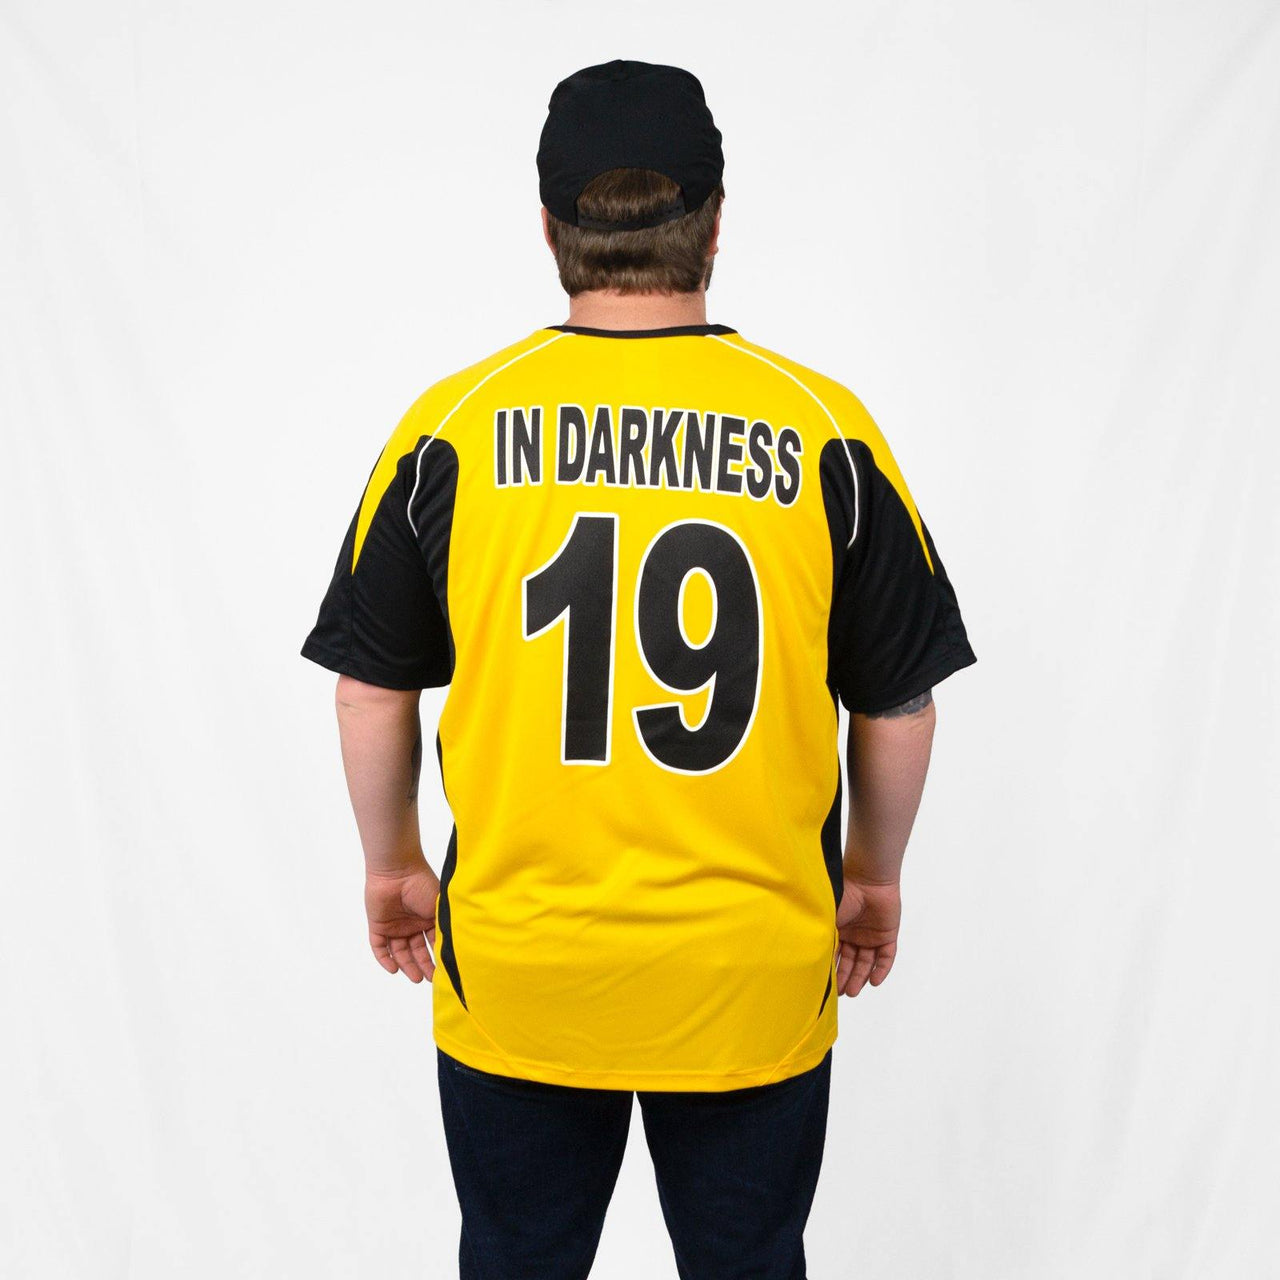 Buy – Varials "In Darkness" Jersey and Hat – Band & Music Merch – Cold Cuts Merch